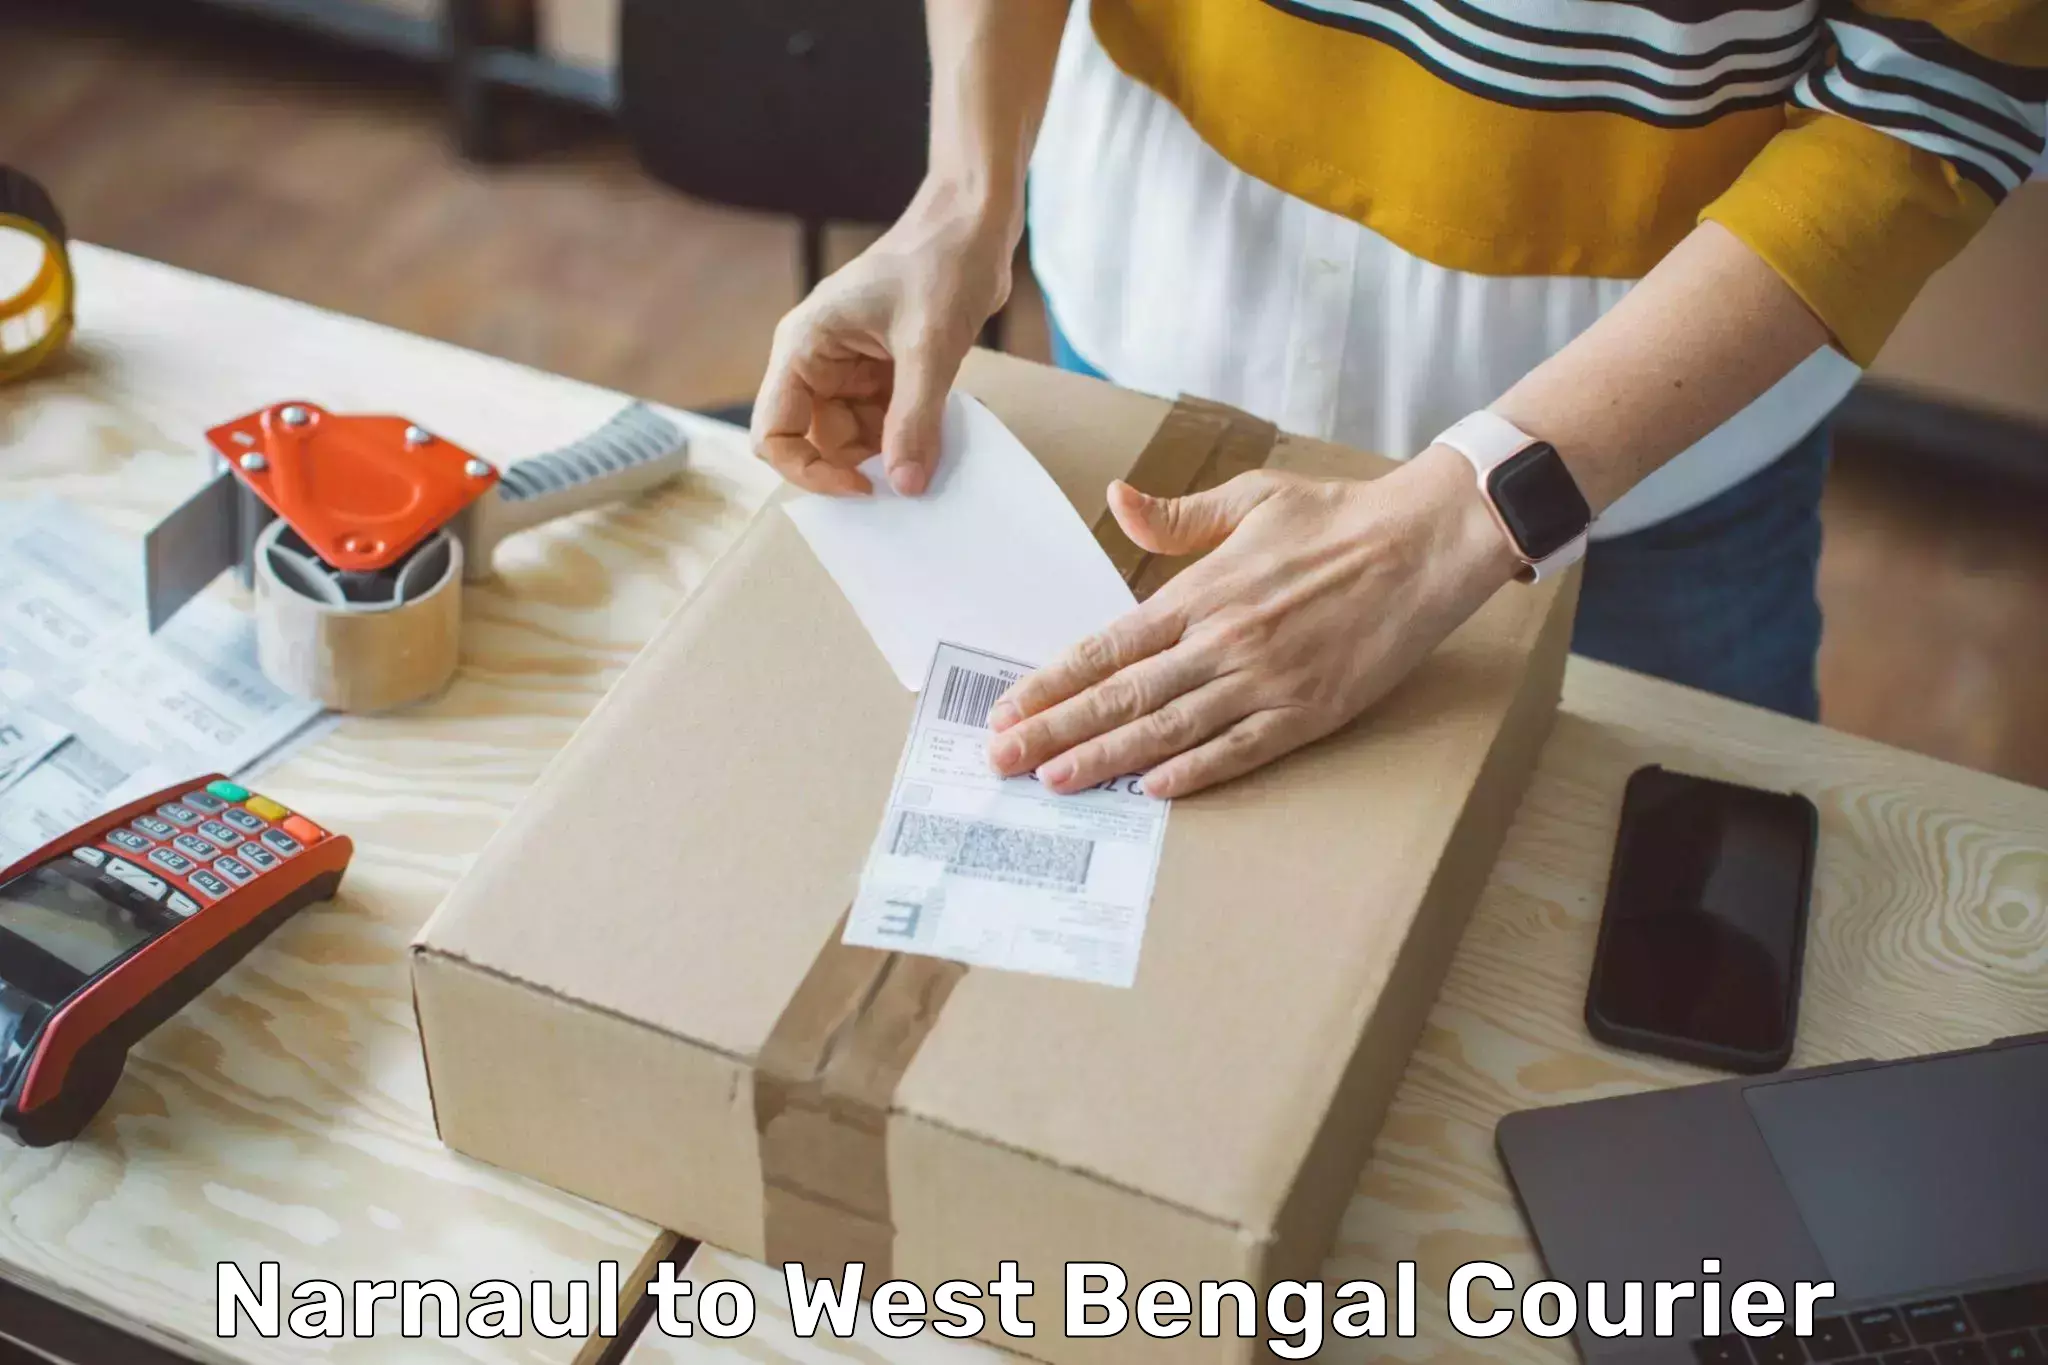 Global courier networks Narnaul to Bagdogra